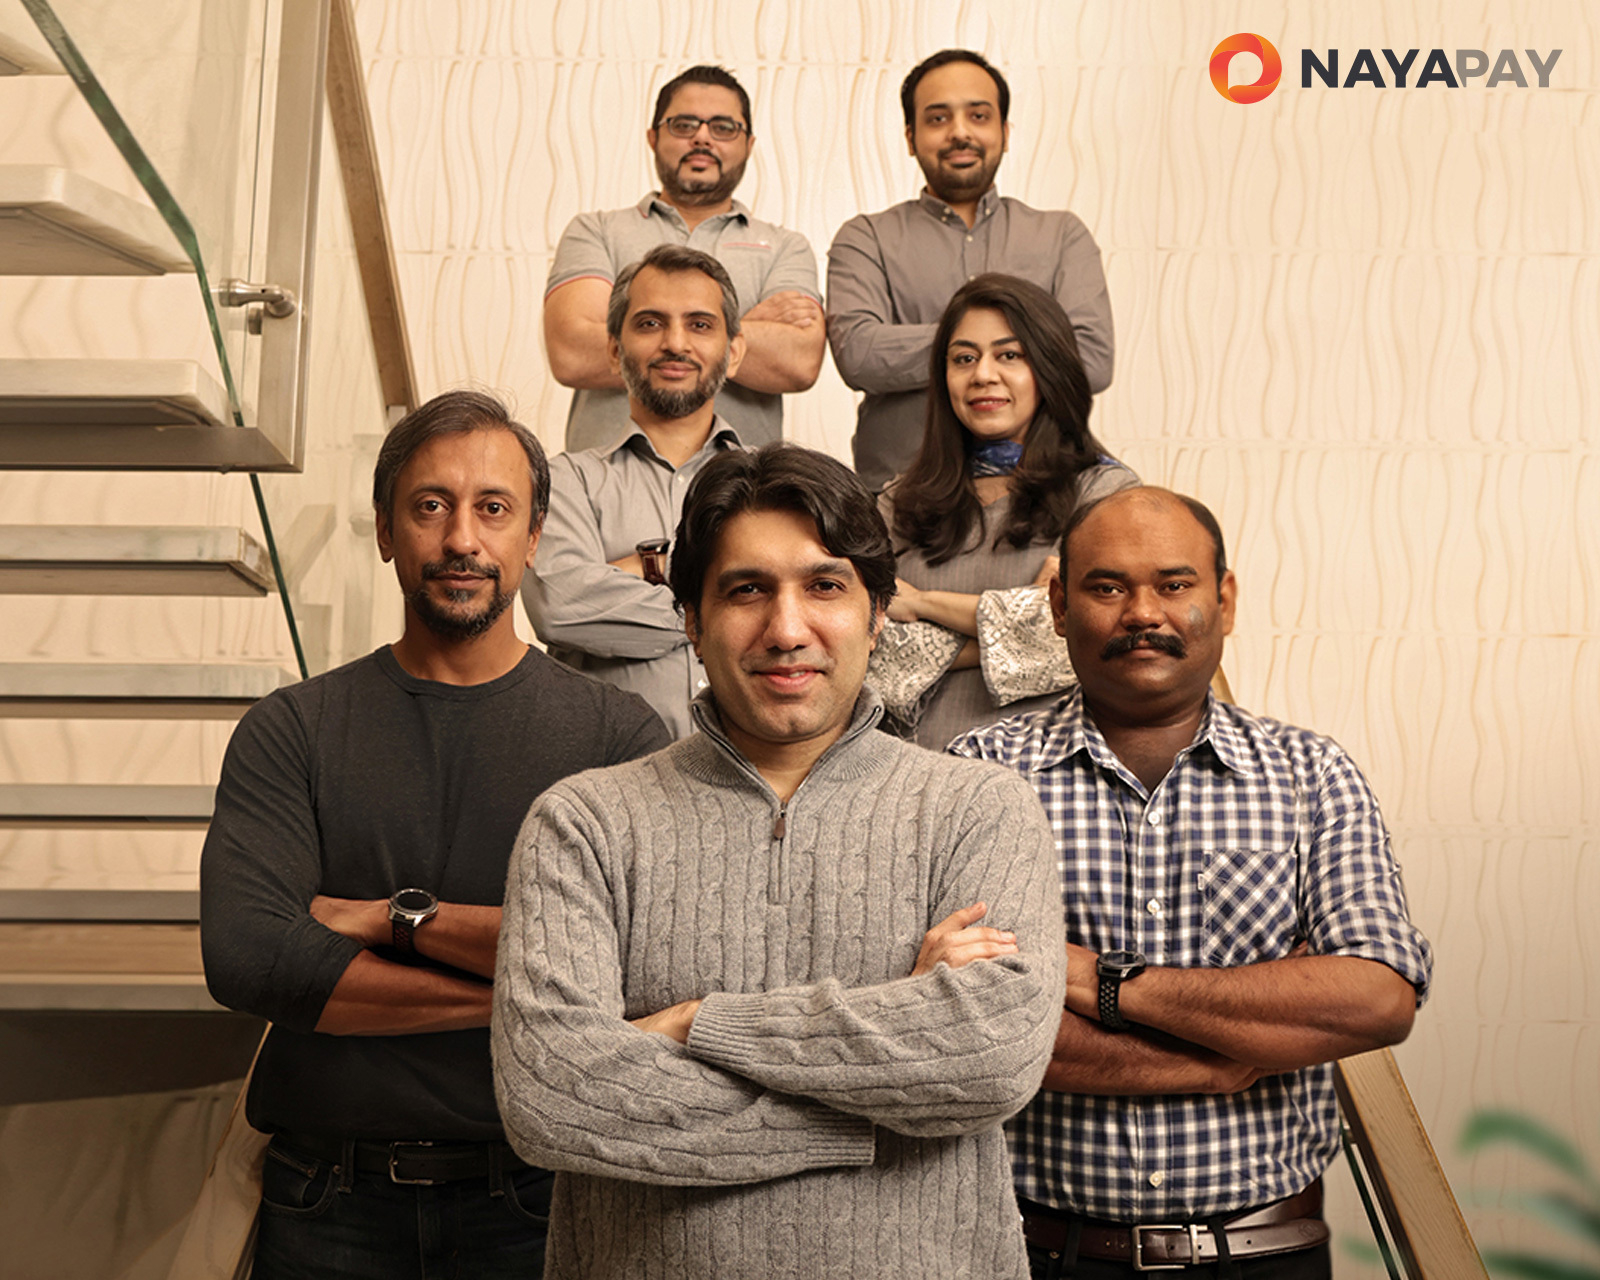 NayaPay secures $13m as it rolls out digital payments revolution